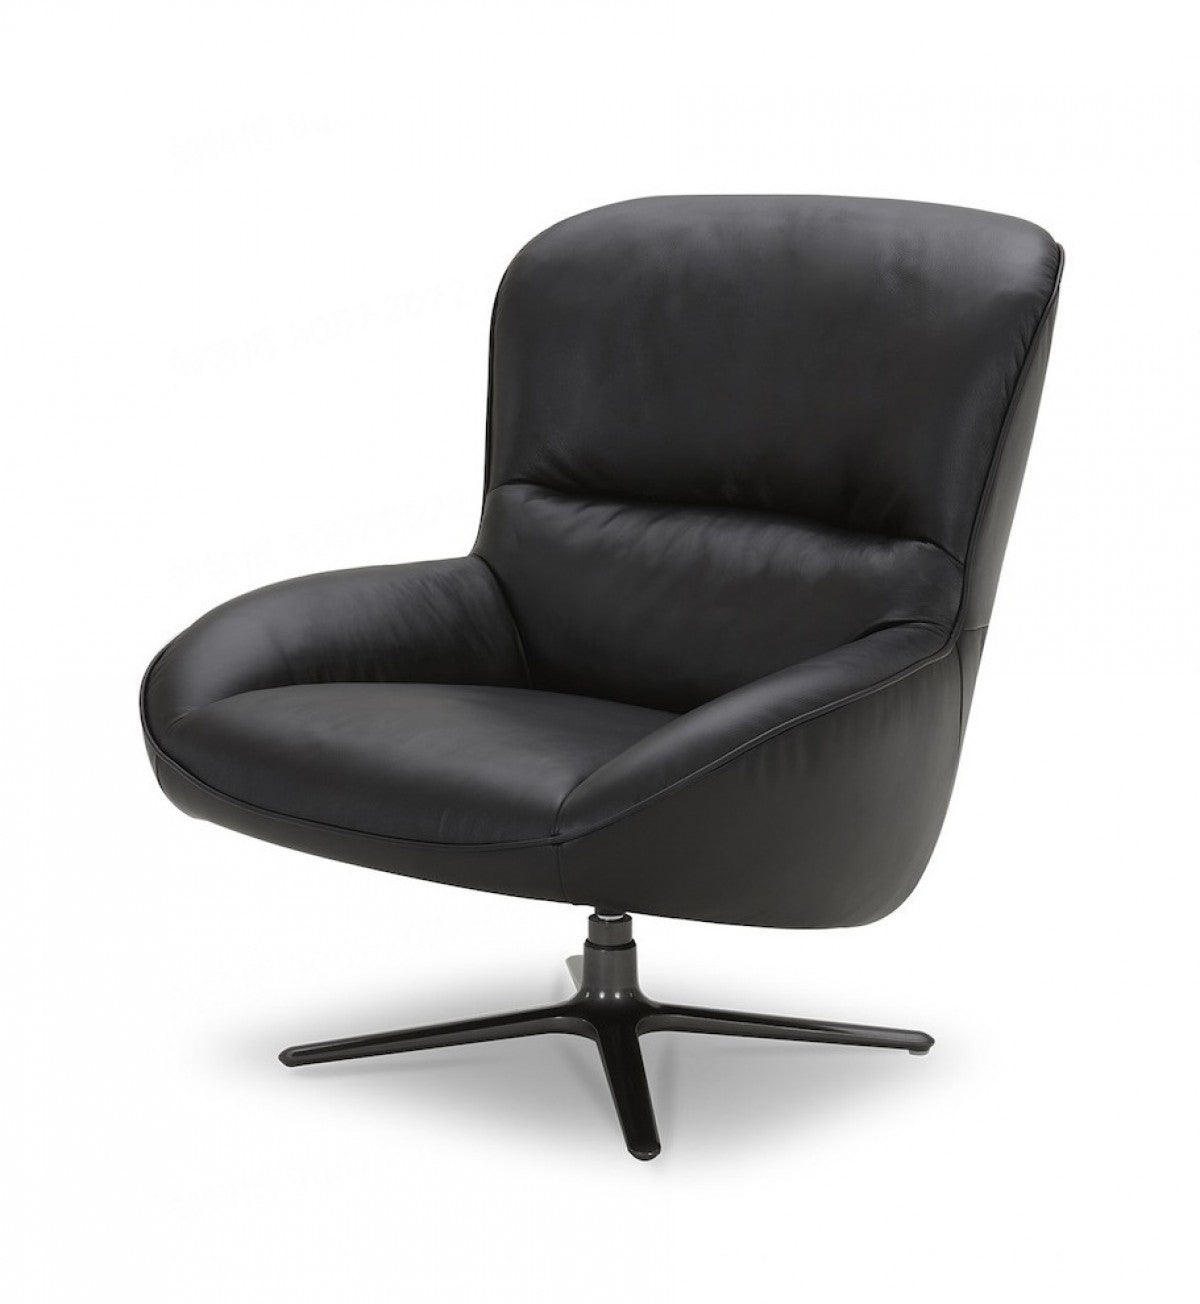 Modrest Theo - Modern Black Leather Accent Chair